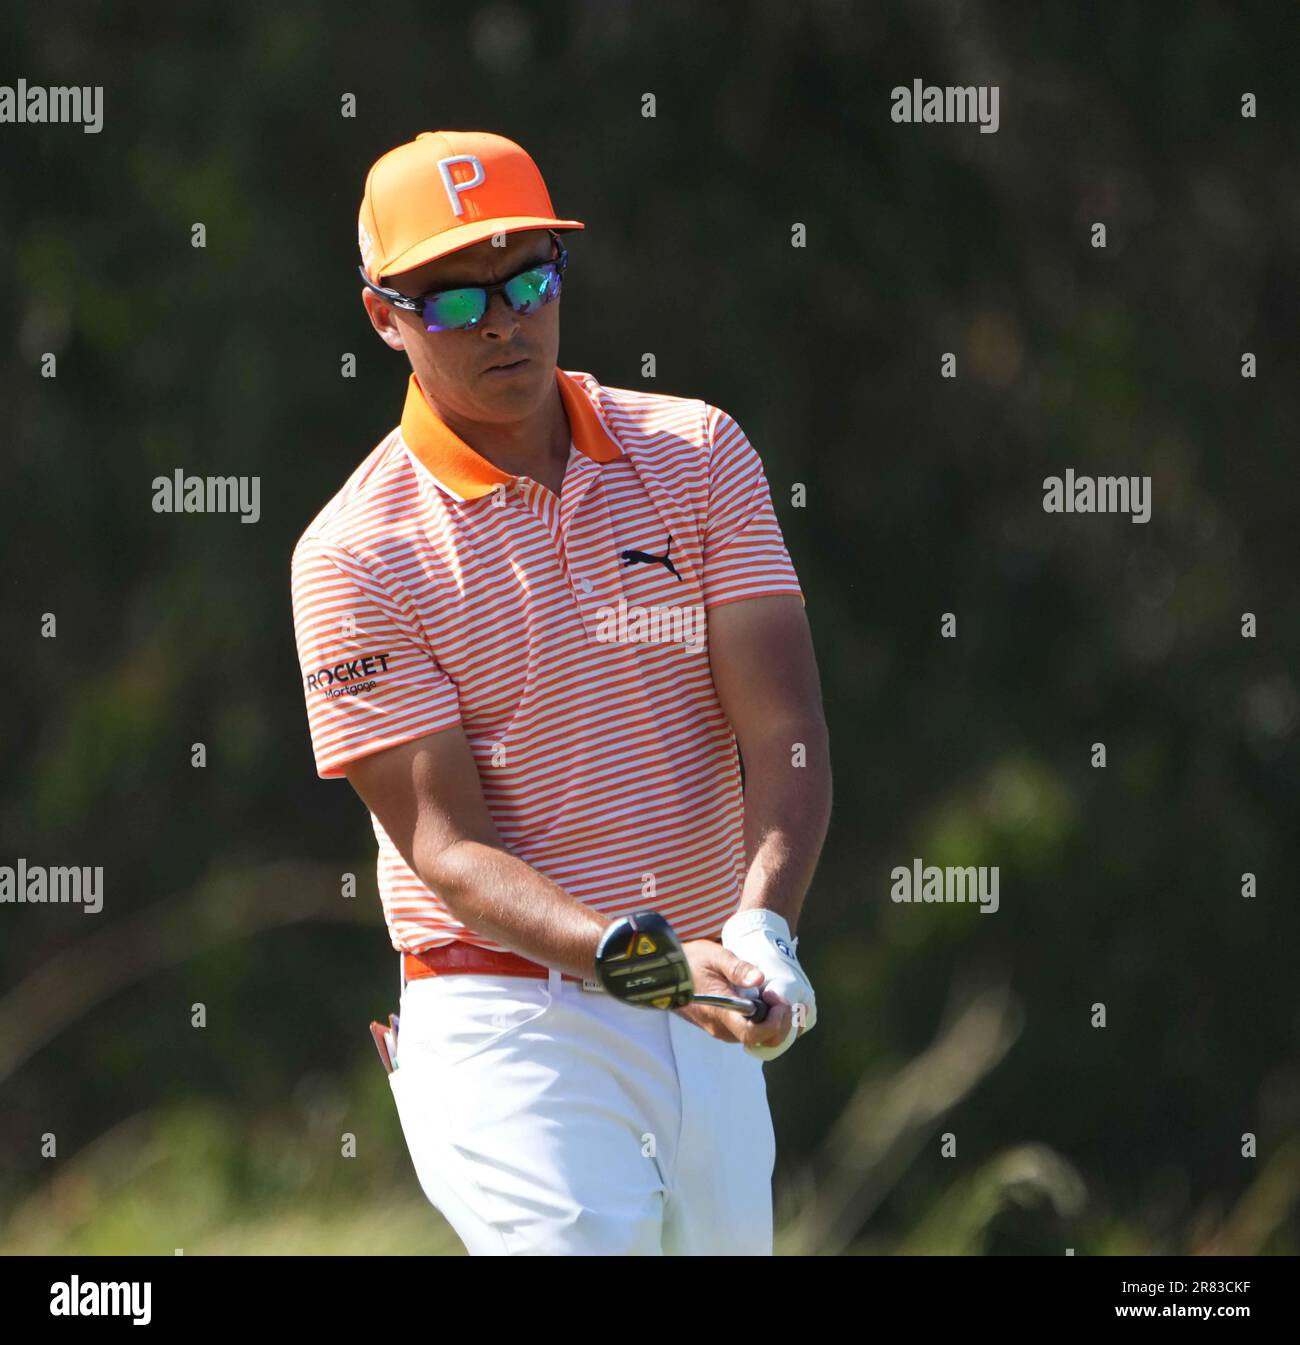 June 18, 2023 Golf 2023; Rickie Fowler finished tied for fifth place after being on top of the leader board for the past two days at the 2023 US Open, The Los